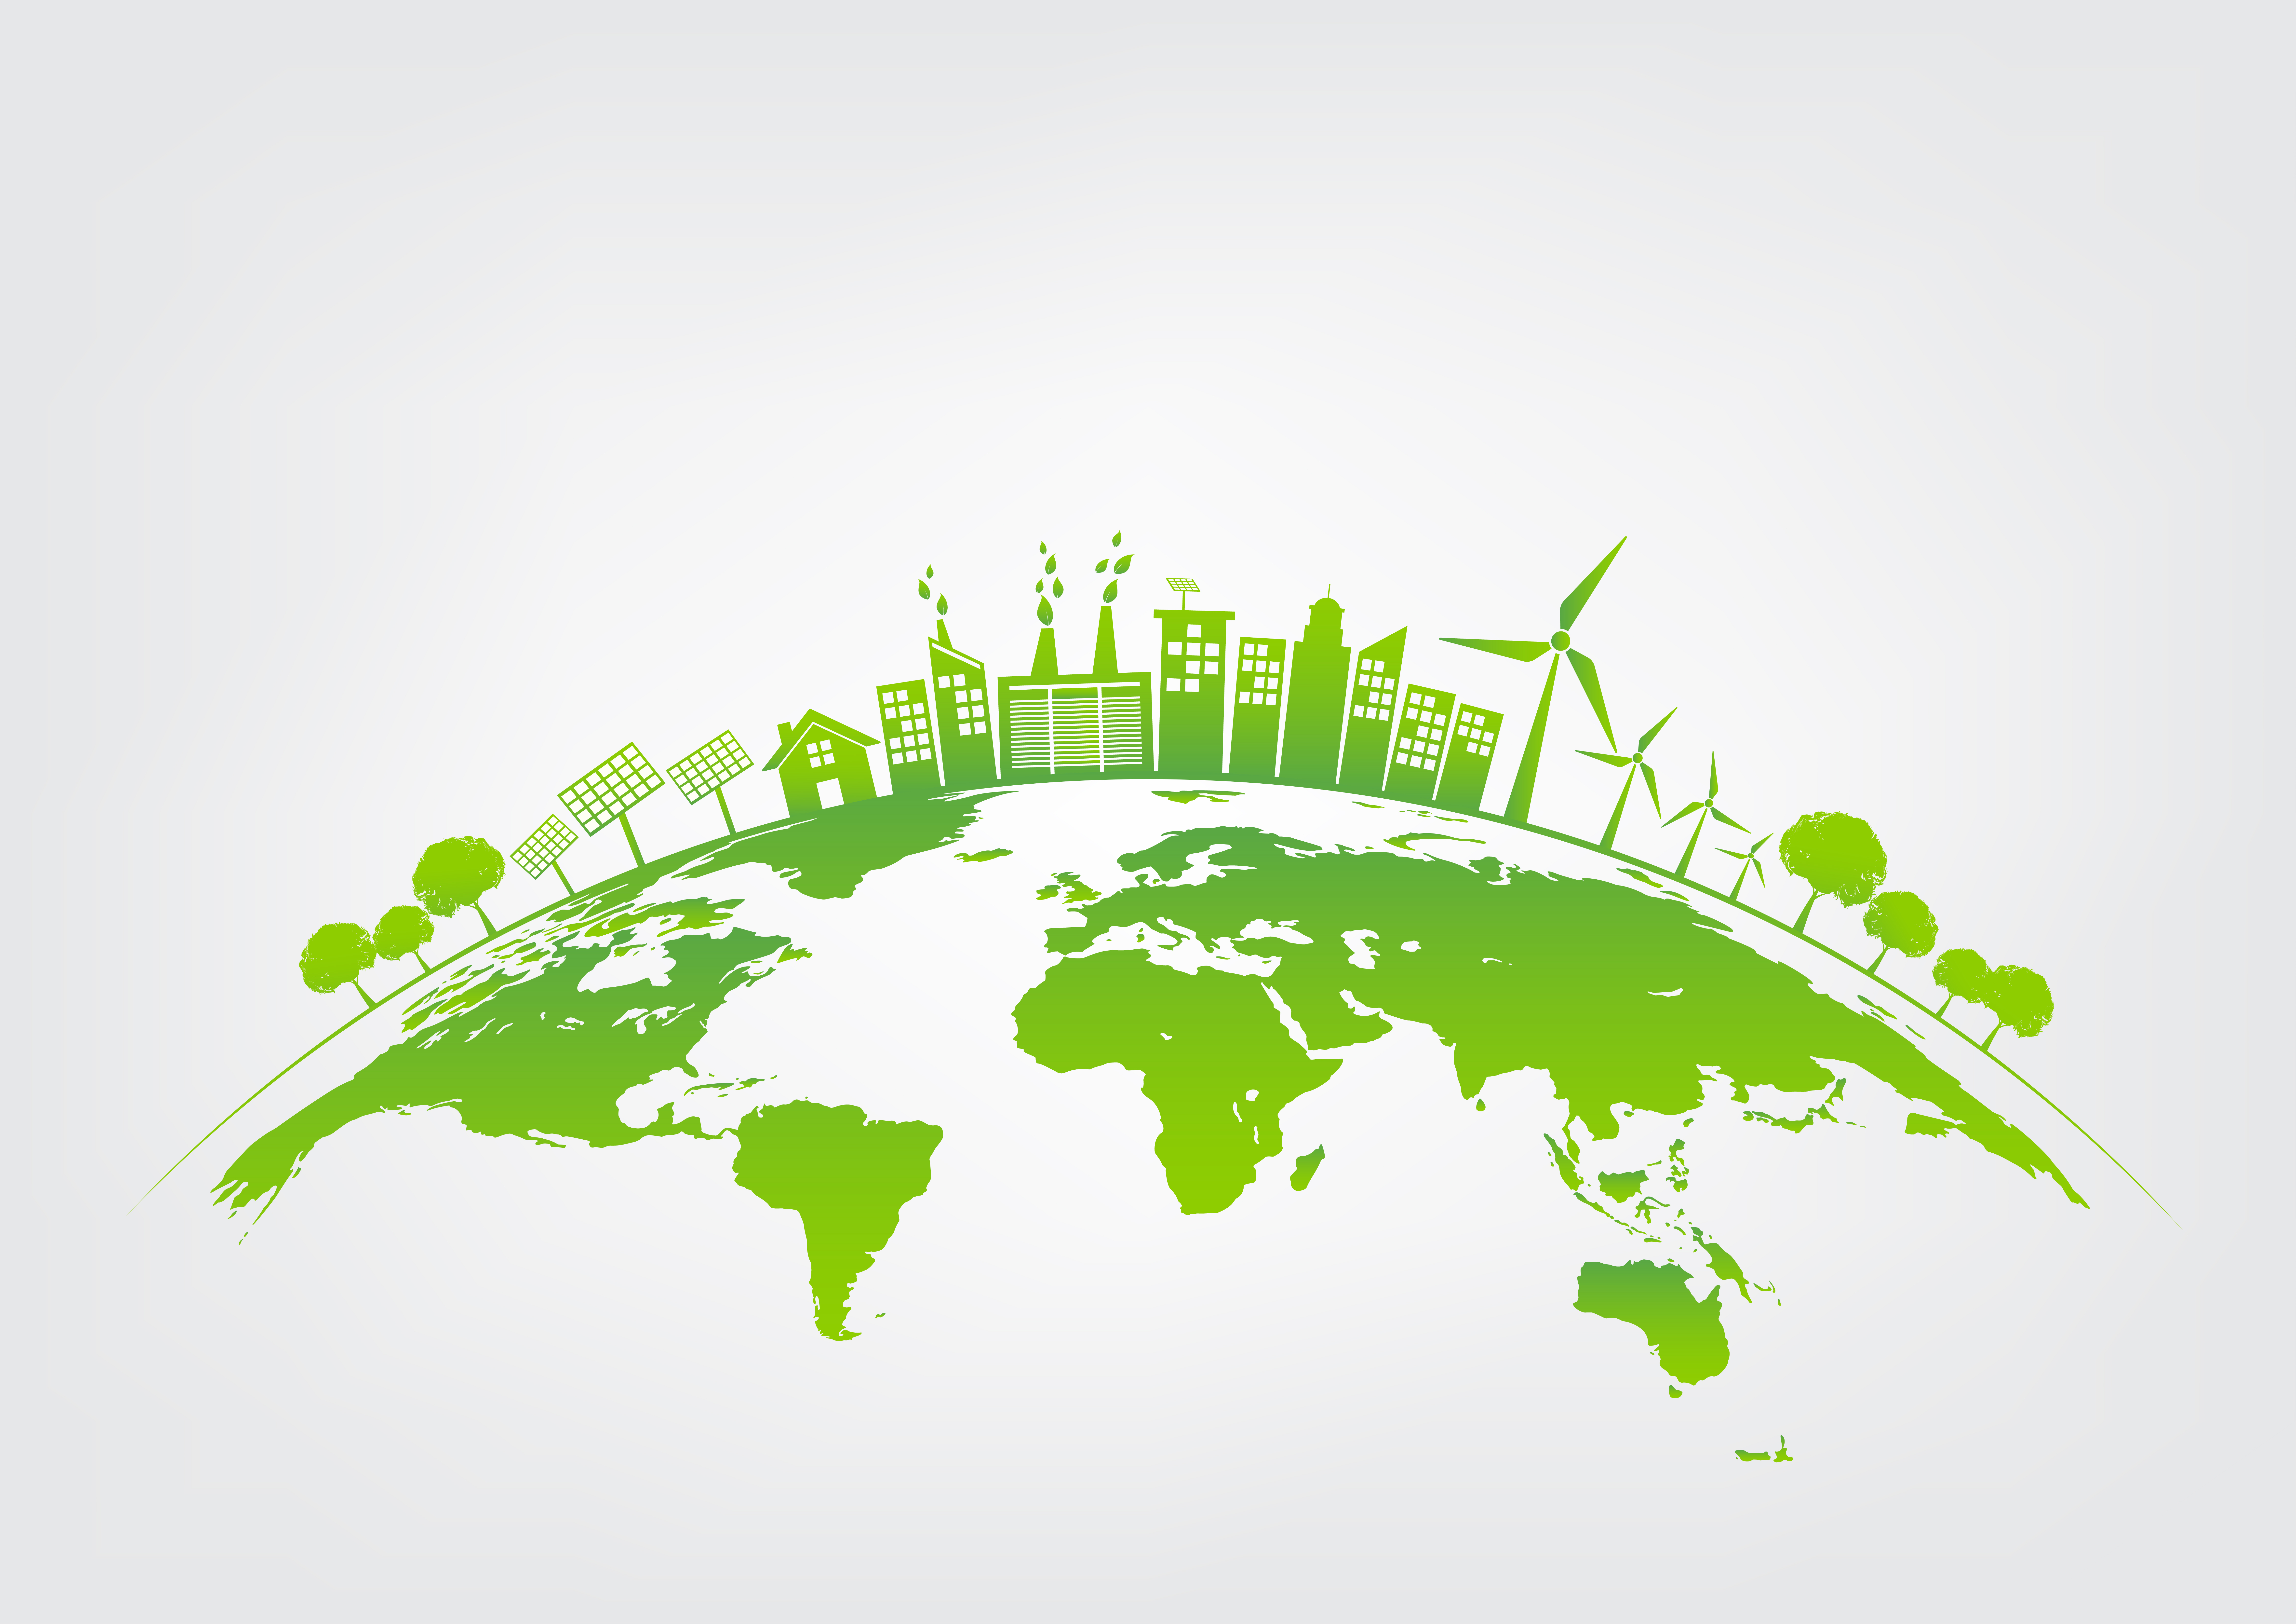 Green & white image of the world with wind turbines